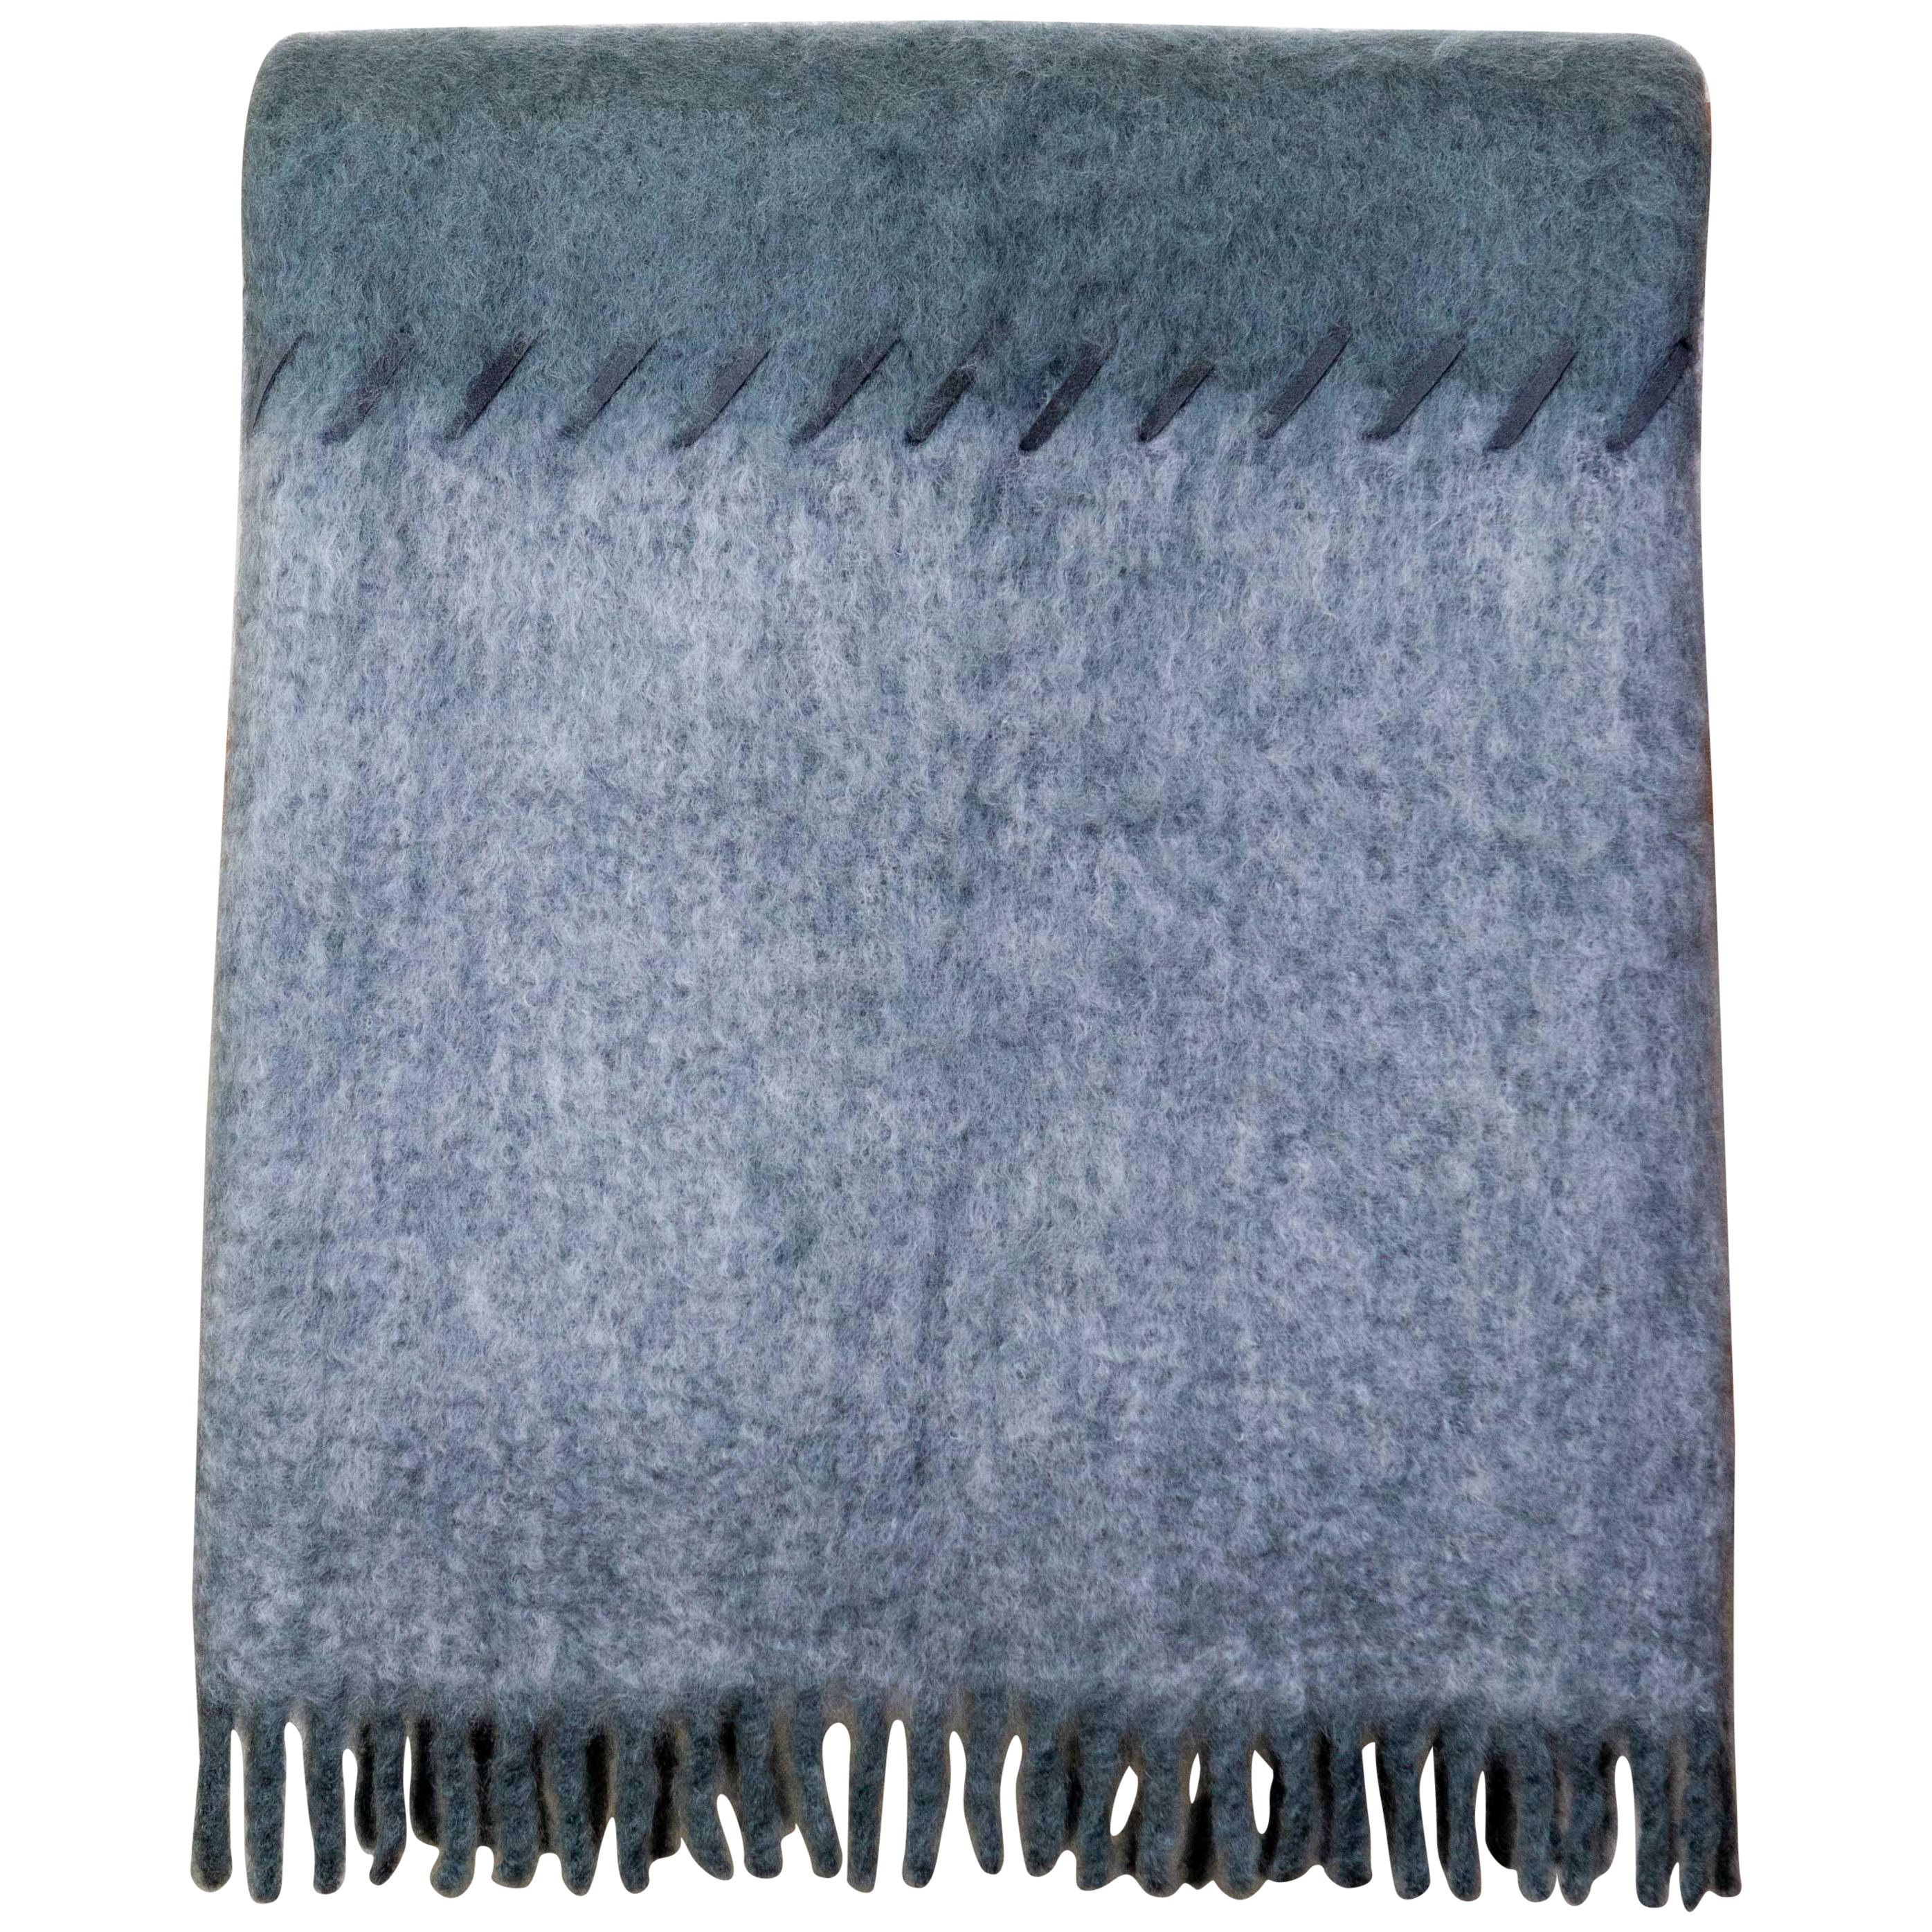 Mohair Blanket with Suede Stitching in Light and Dark Grey, in Stock